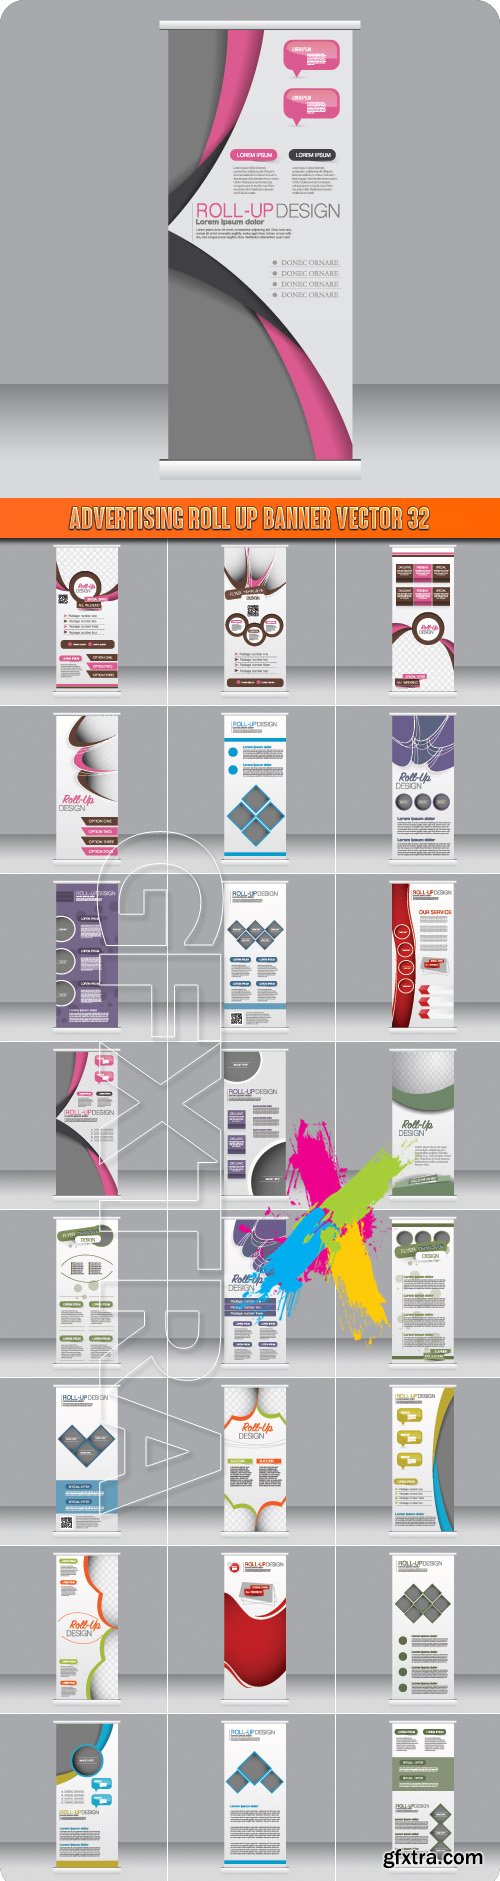 Advertising Roll up banner vector 32